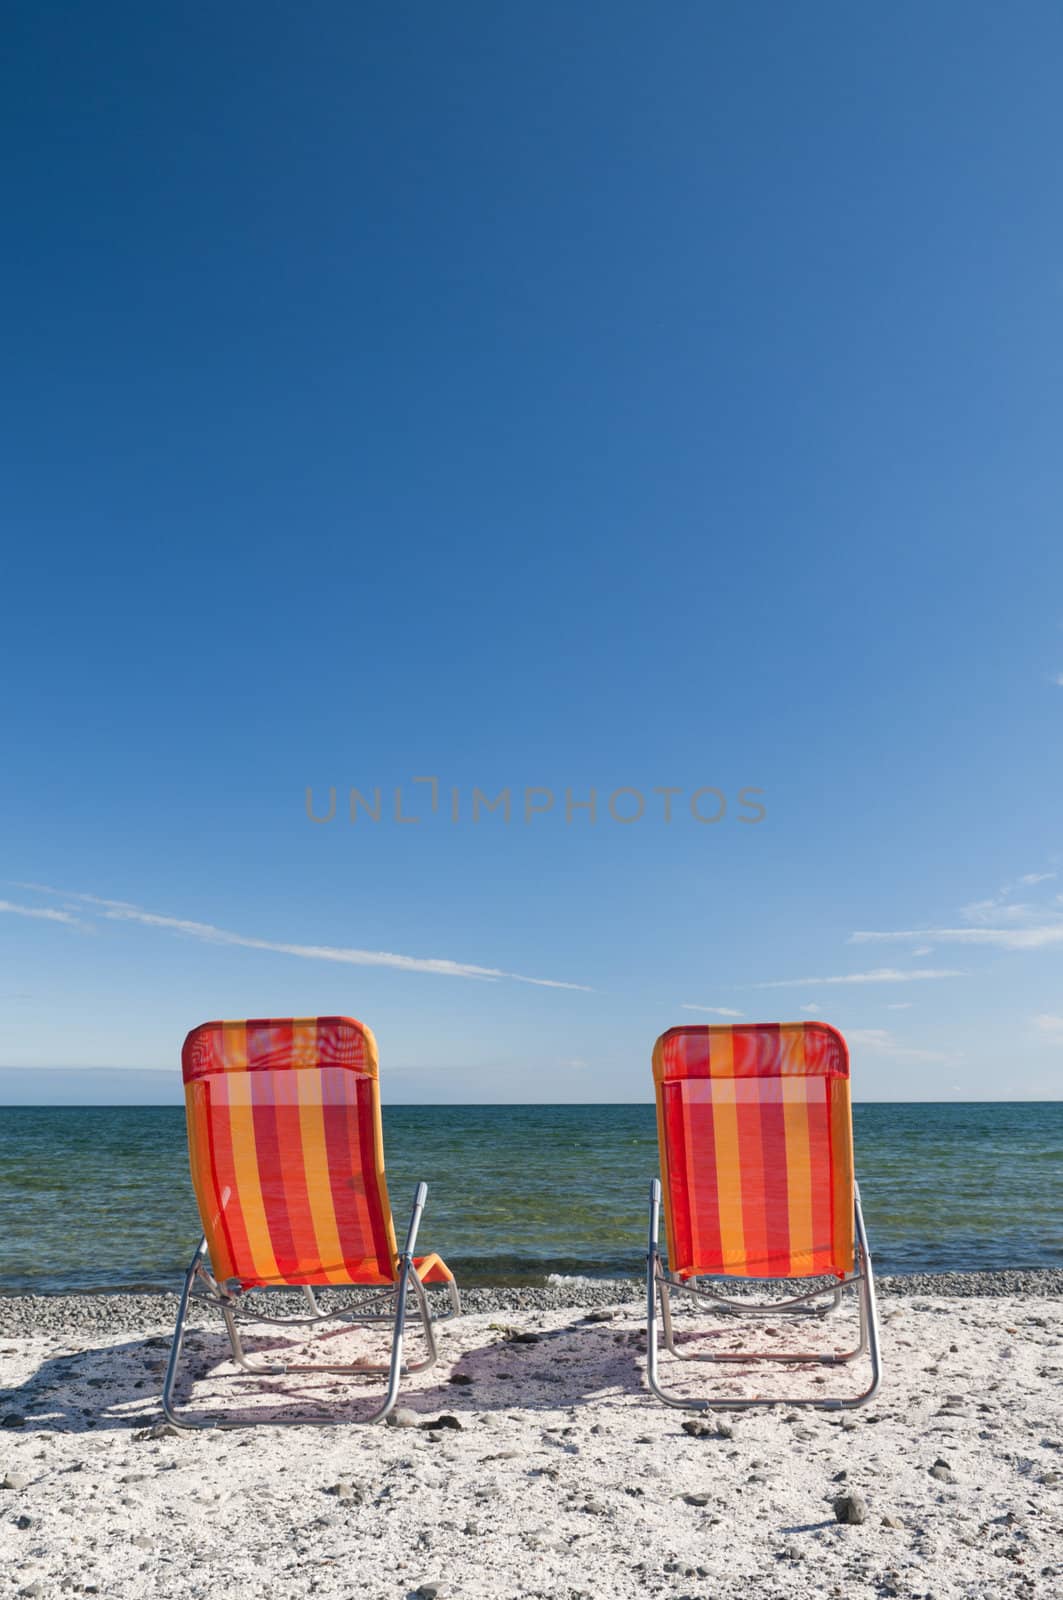 Beach Chairs on the Lake by Gordo25